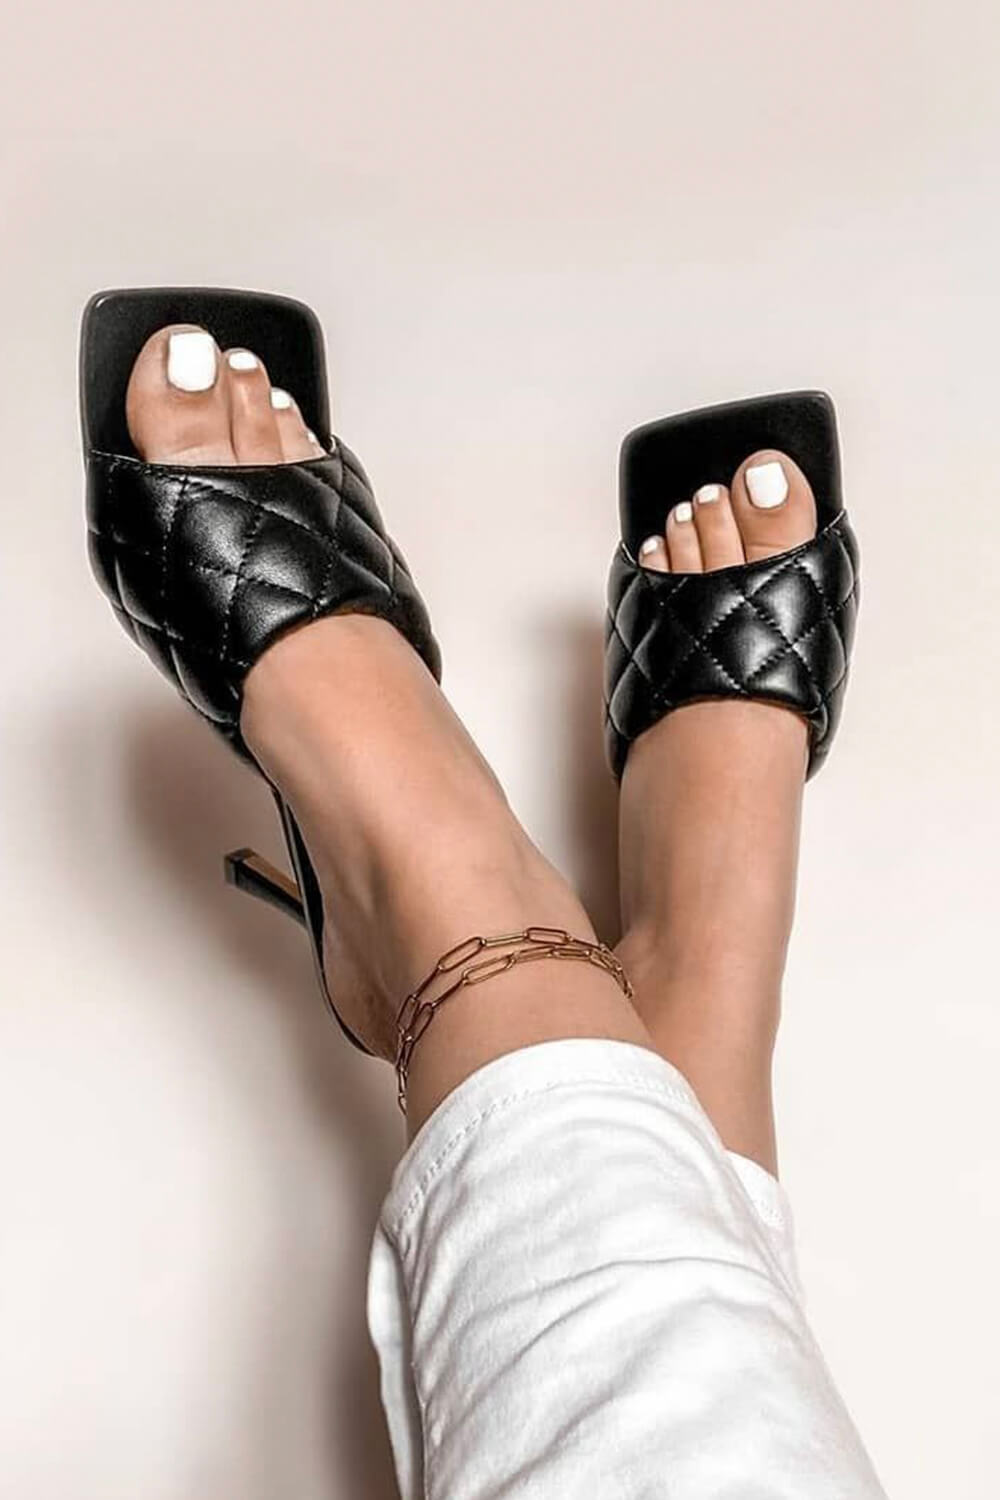 Black Faux Leather Square Toe Quilted Heeled Mules